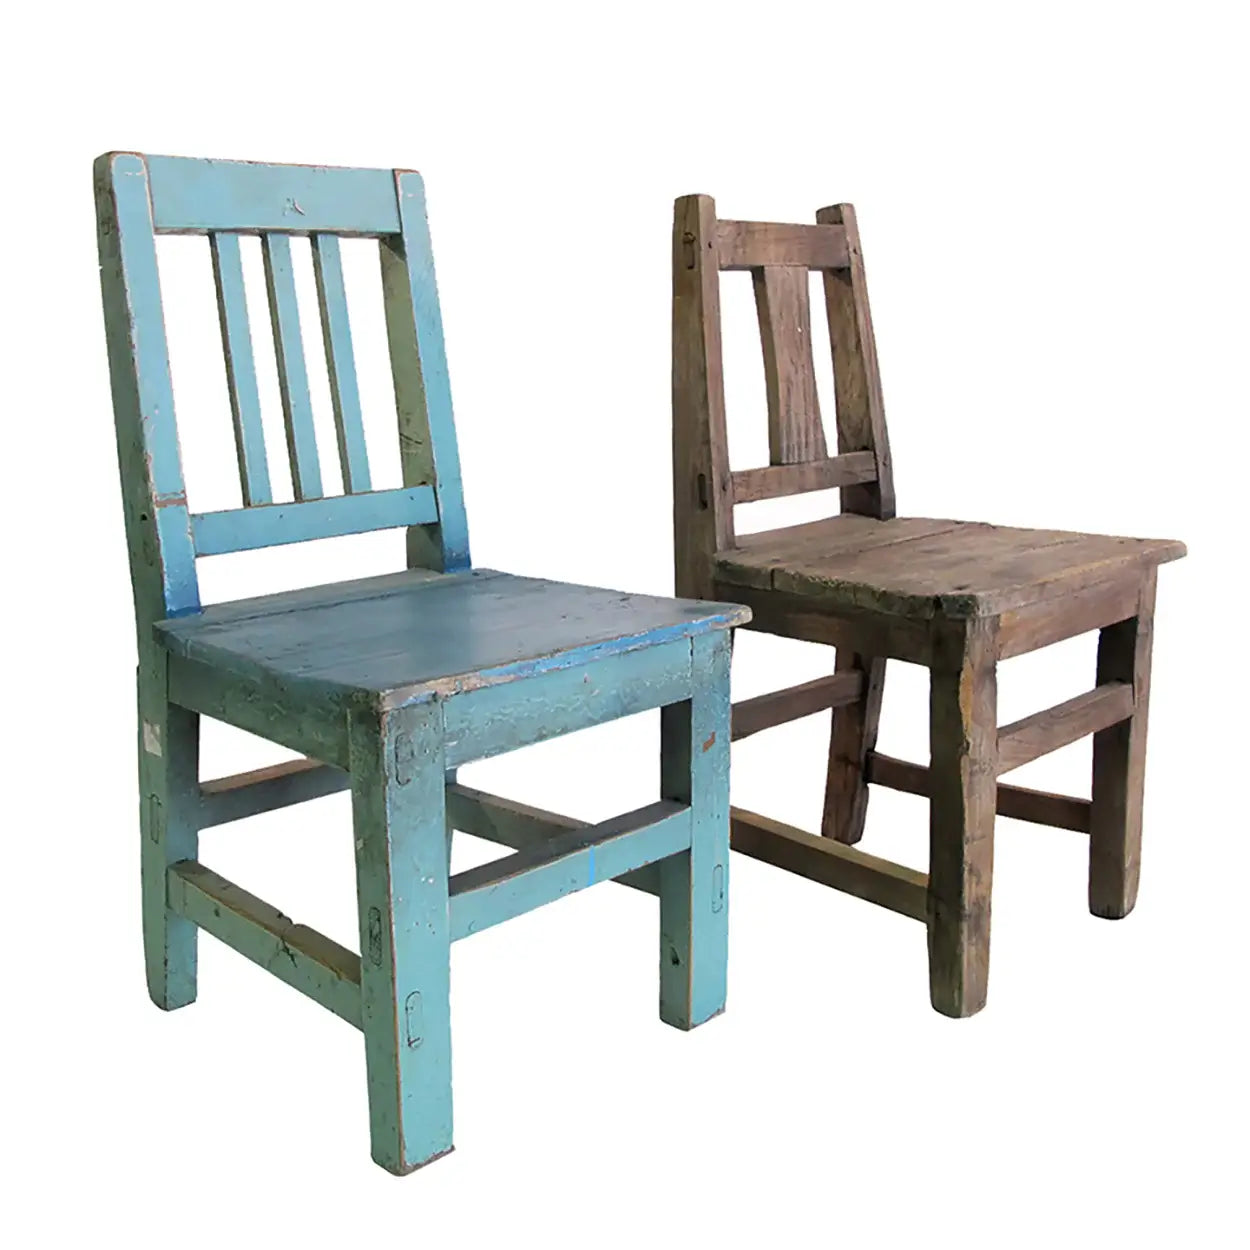 Painted and natural wood children's chairs. 